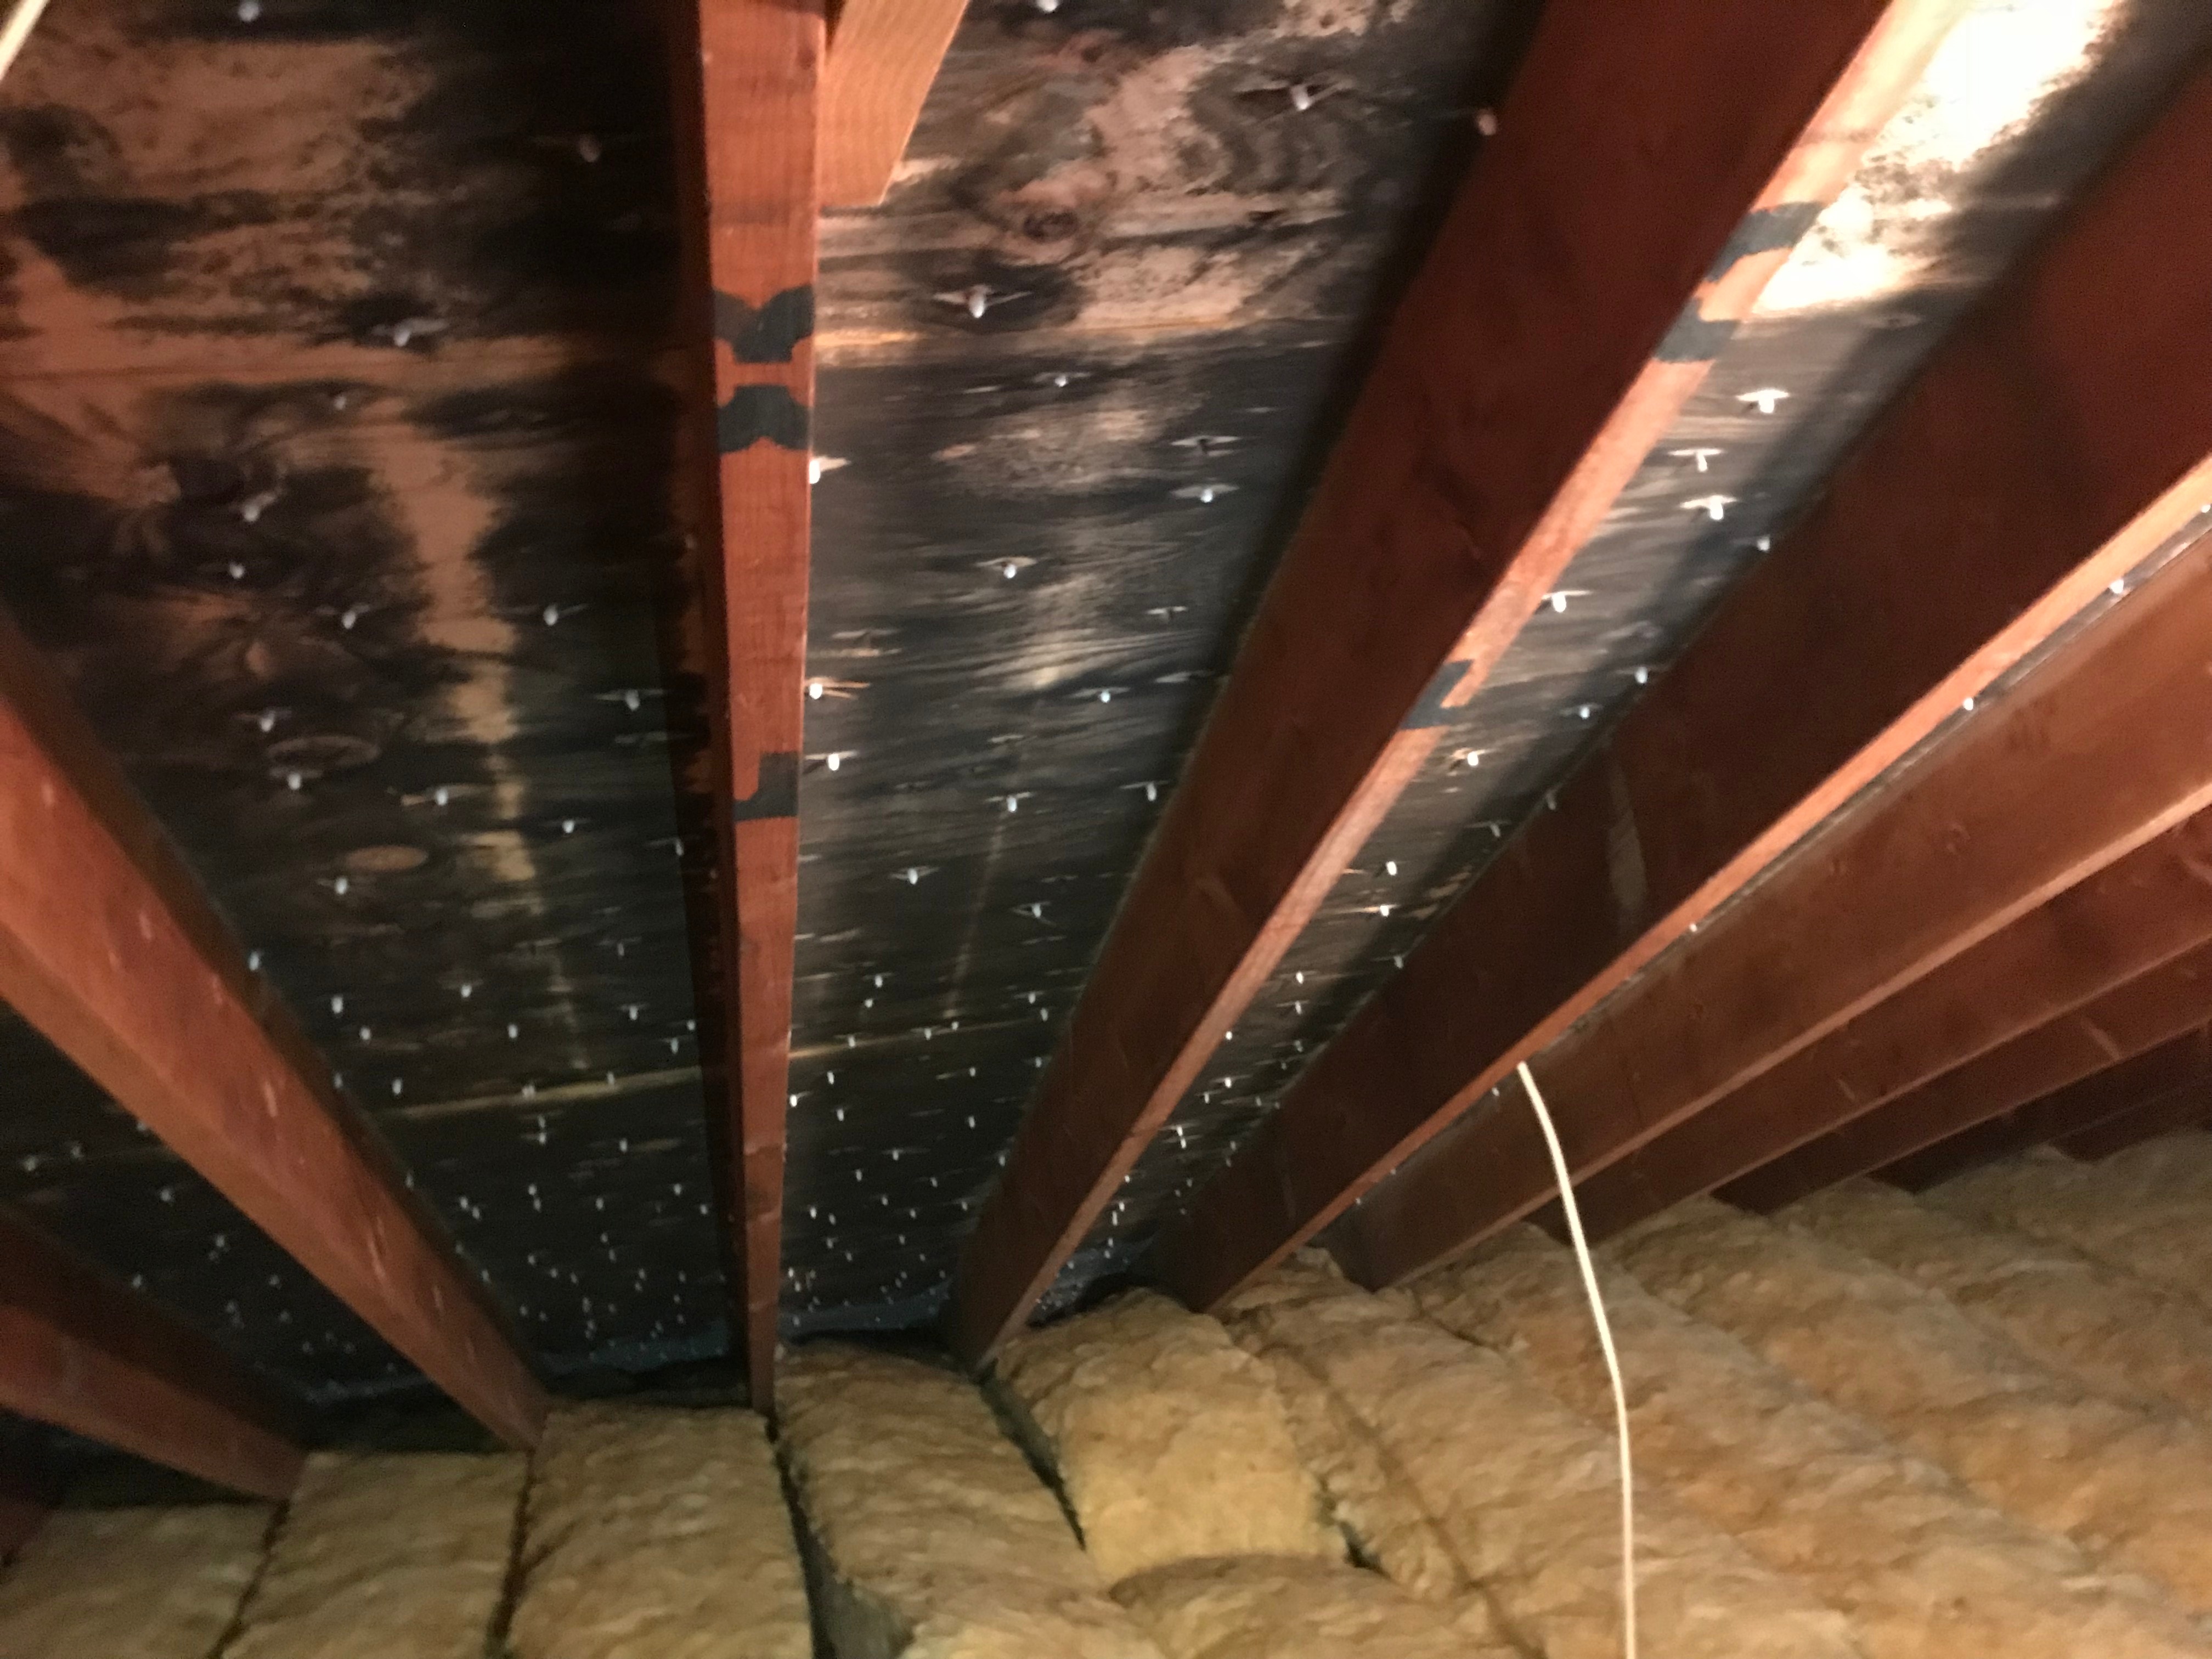 mold can grow in an attic